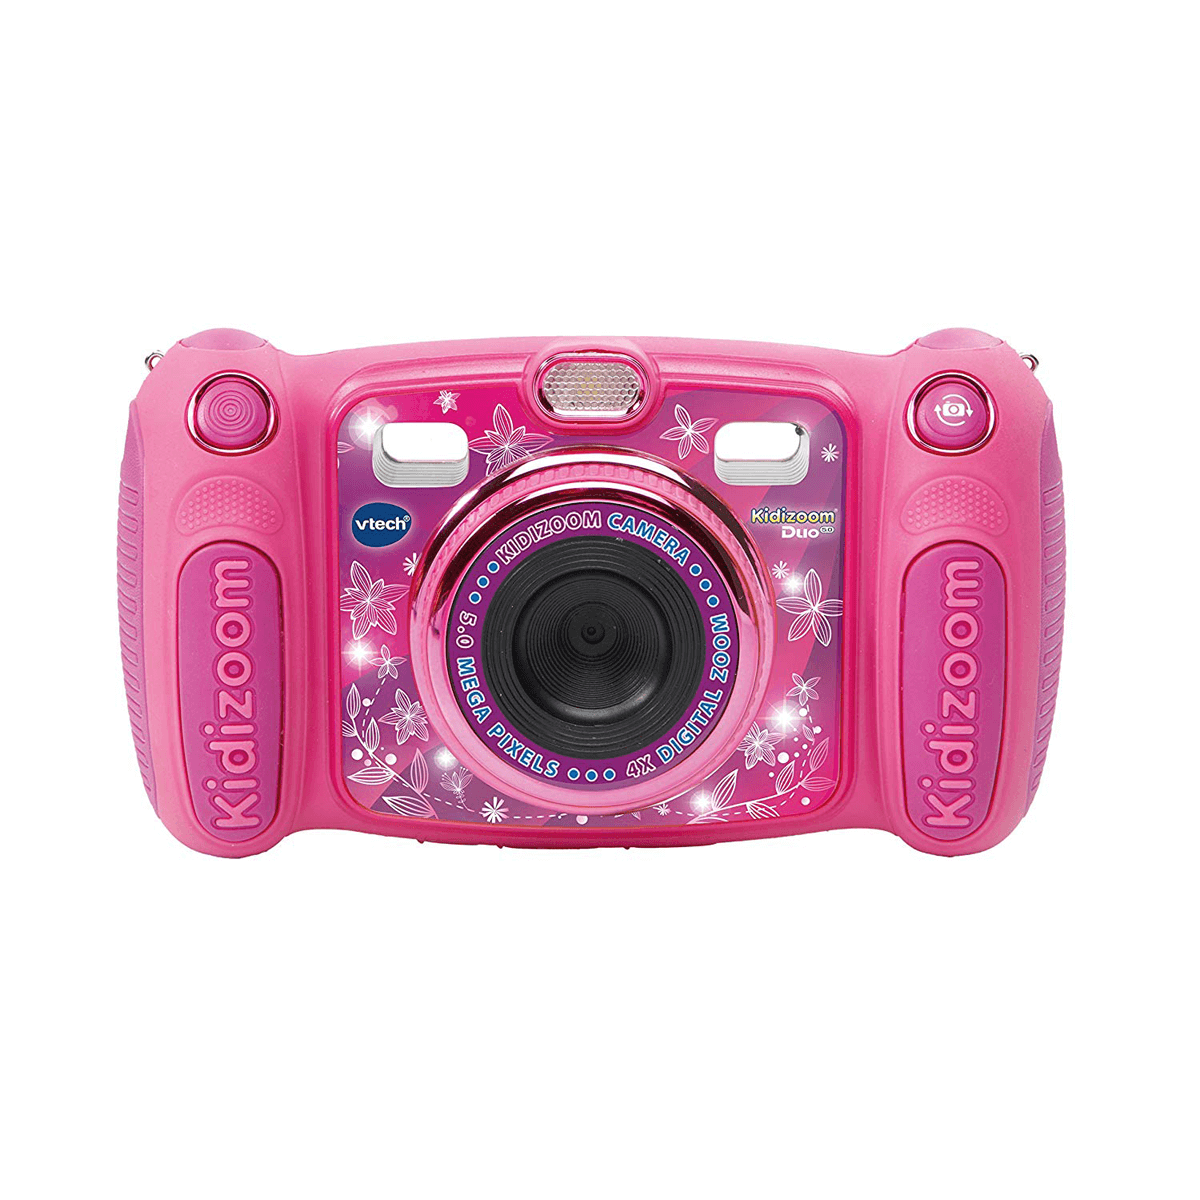 Product Review: VTech Kidizoom Camera Pix for Kids